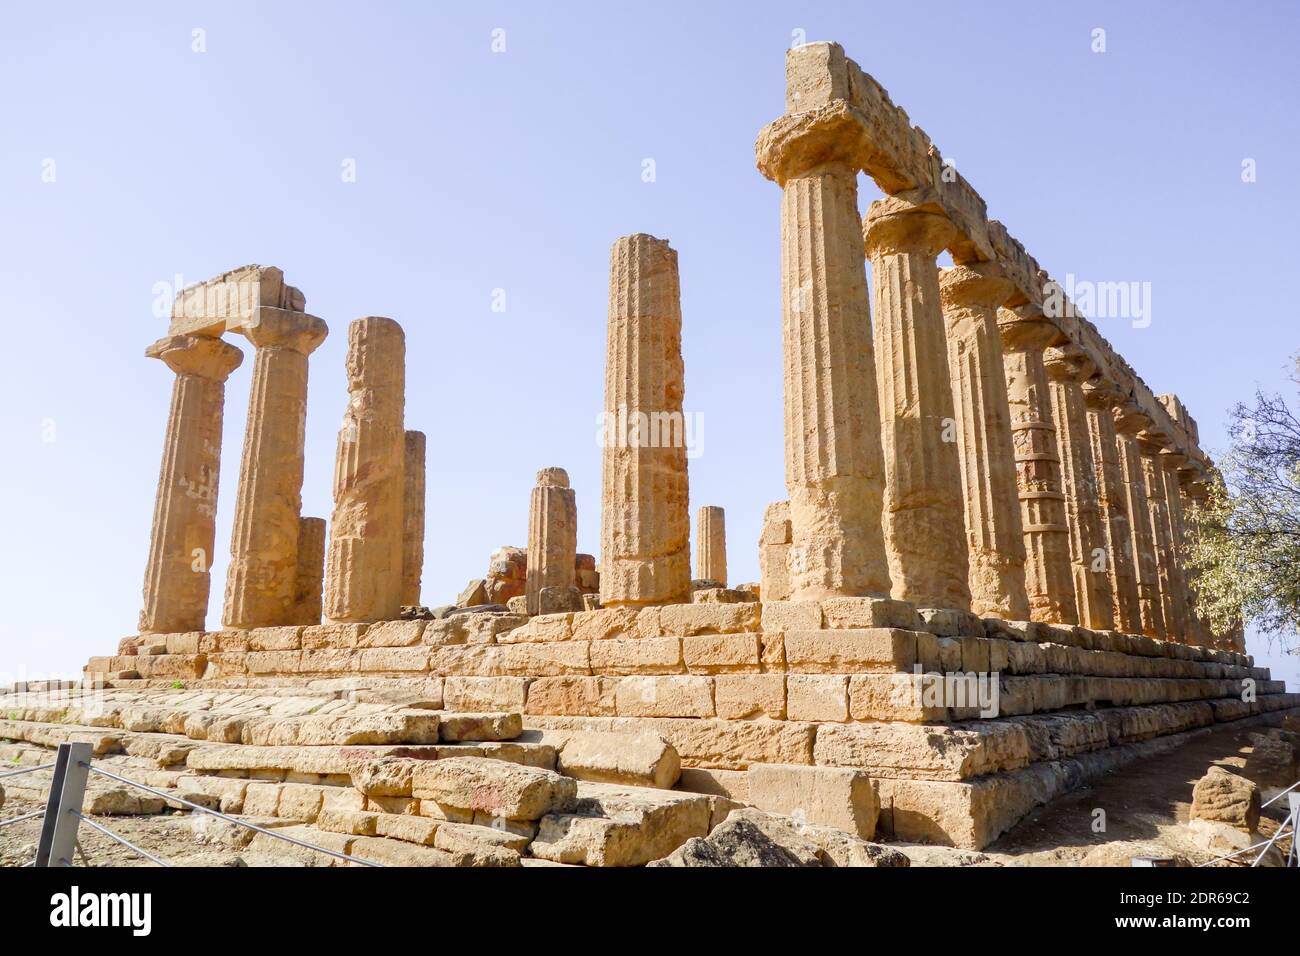 SICILY, ITALY  - OCT 14TH 2019: Tempio di Giunone, also known as Temple of Juno was built around 5th Century BC in the ancient Roman Greek city of Akr Stock Photo